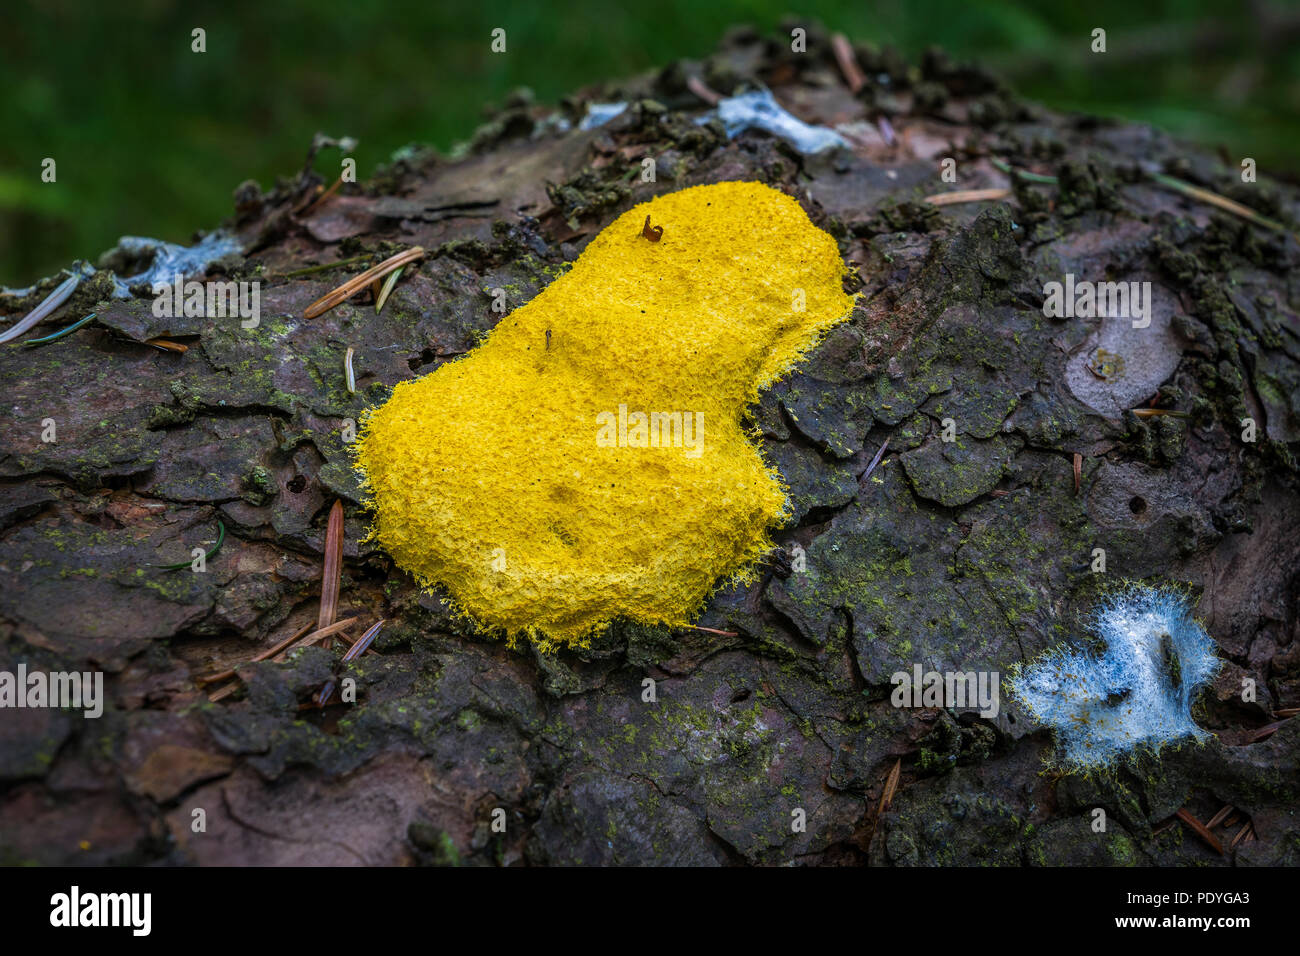 Yellow slime mold on a pine tree trunk. Stock Photo